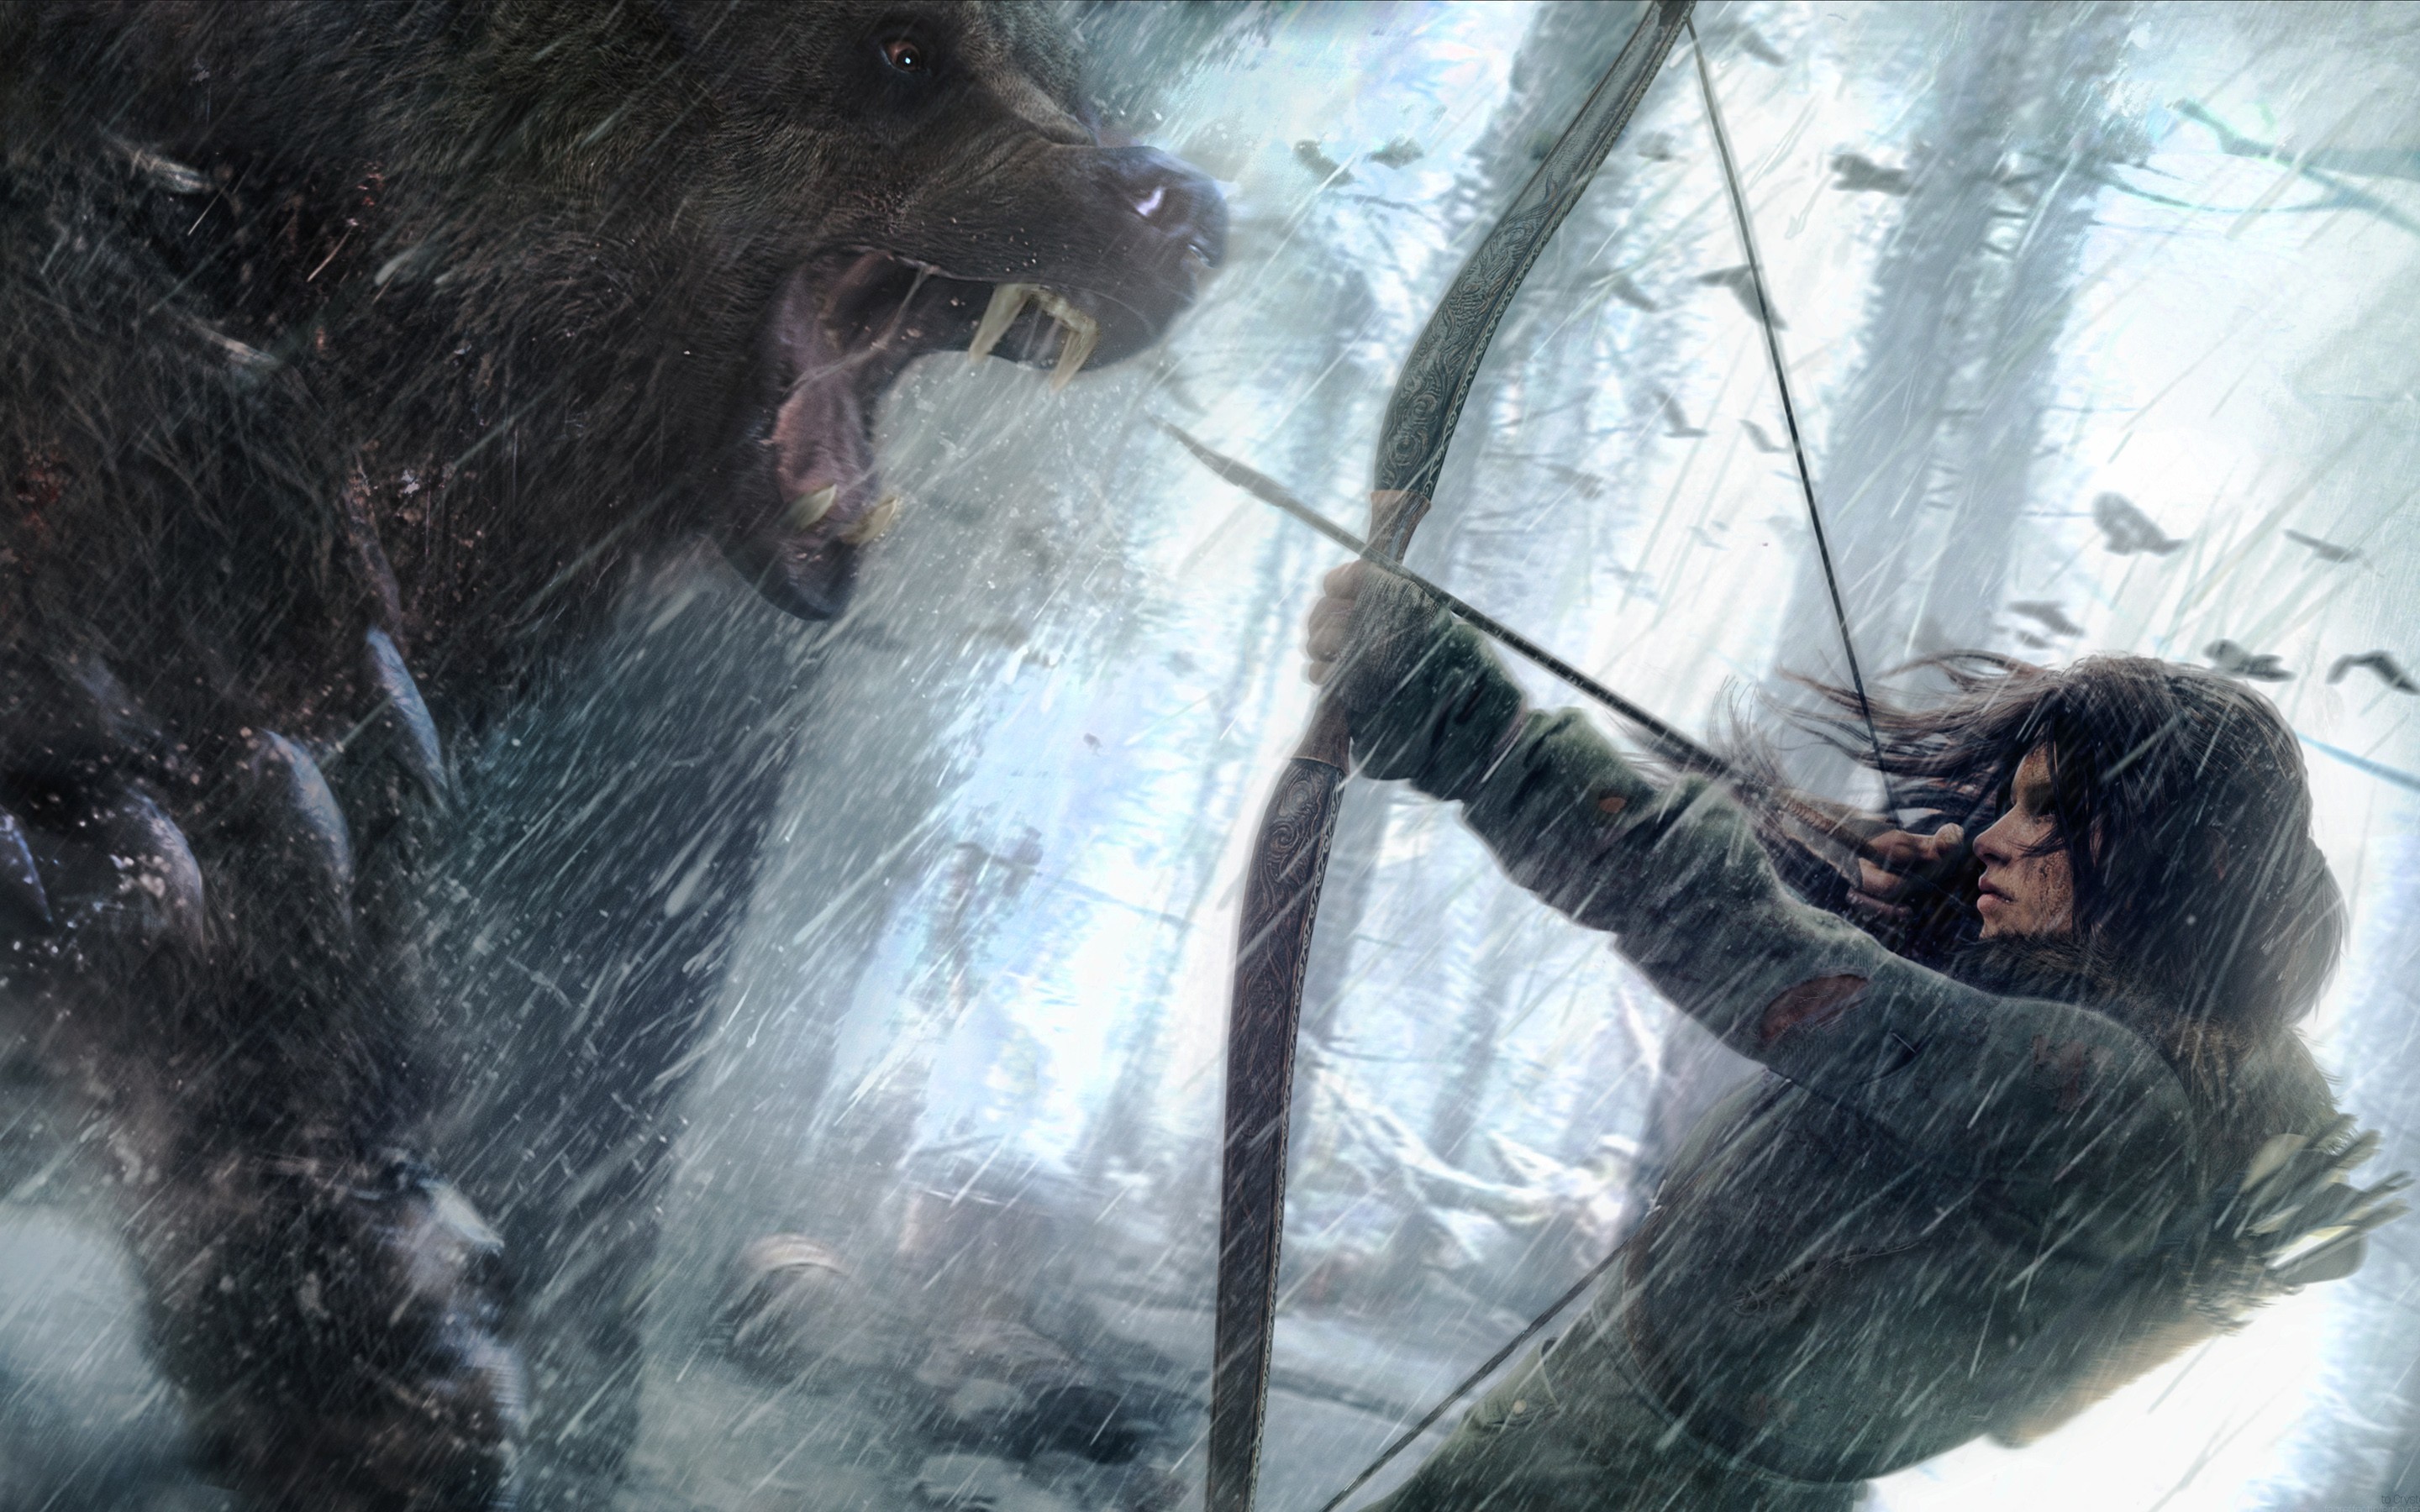 General 2880x1800 Rise of the Tomb Raider artwork video games Tomb Raider video game girls bow bears creature Lara Croft (Tomb Raider) bow and arrow video game characters Crystal Dynamics Square Enix Xbox Game Studios